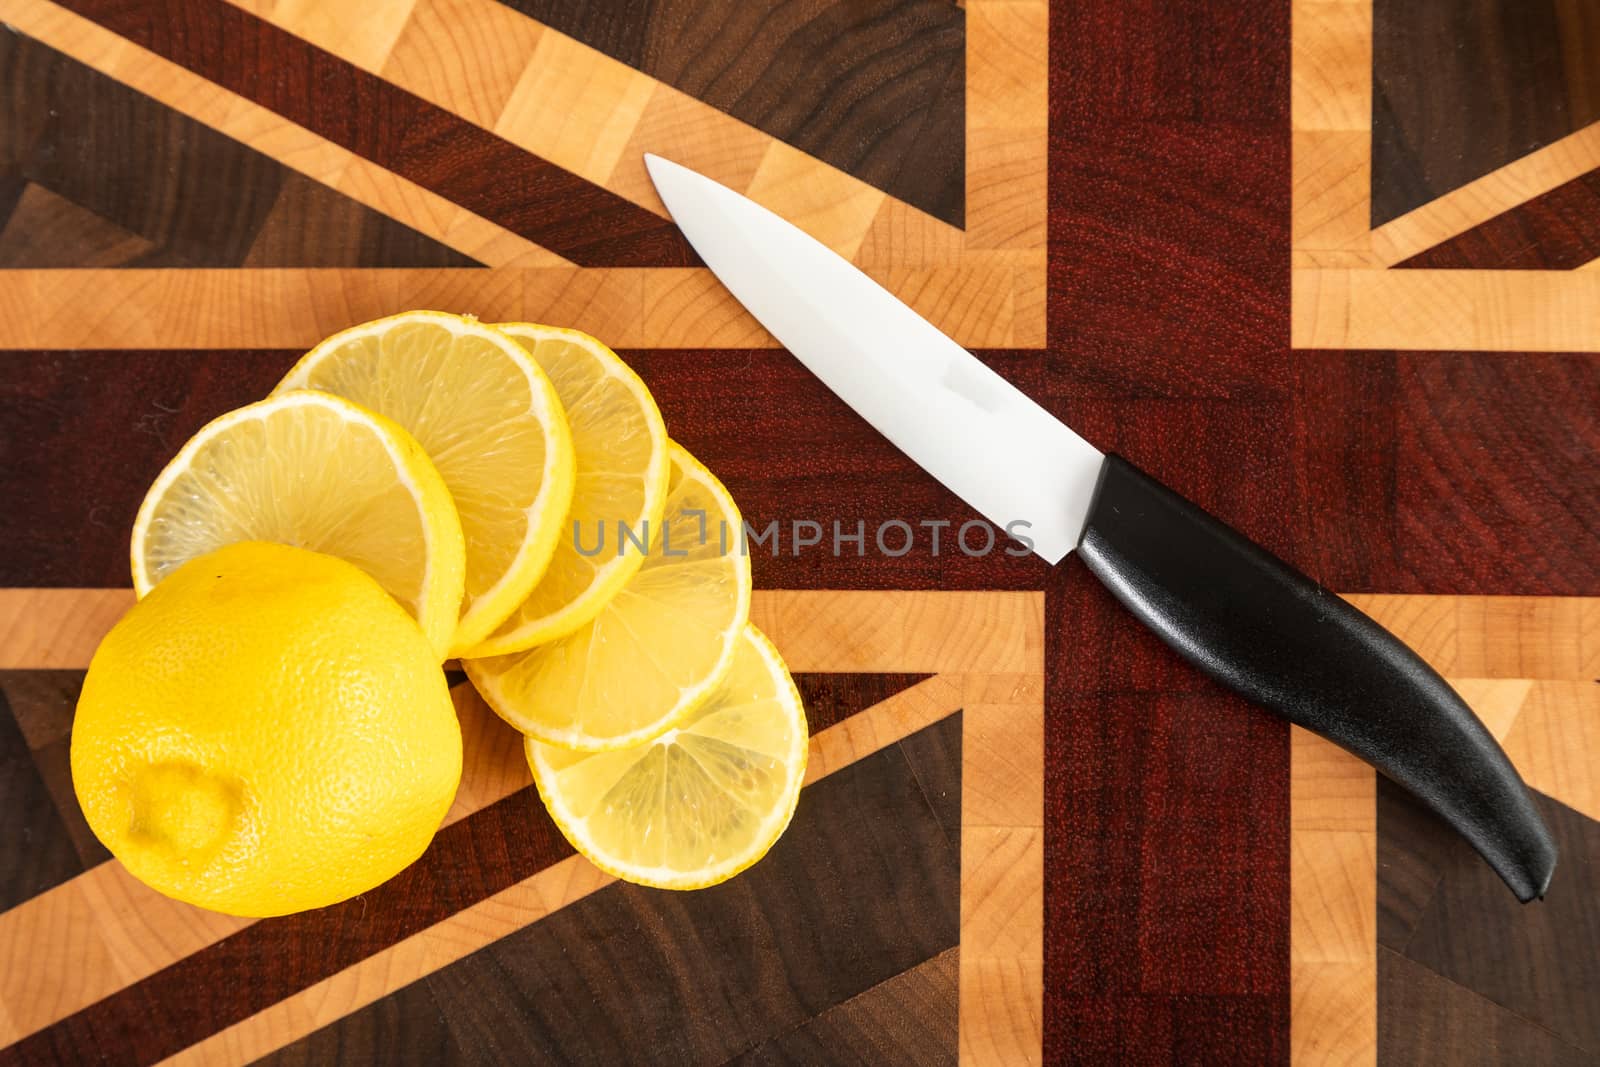 Still life with fruit. Sliced orange and other fruits on a wooden cutting board